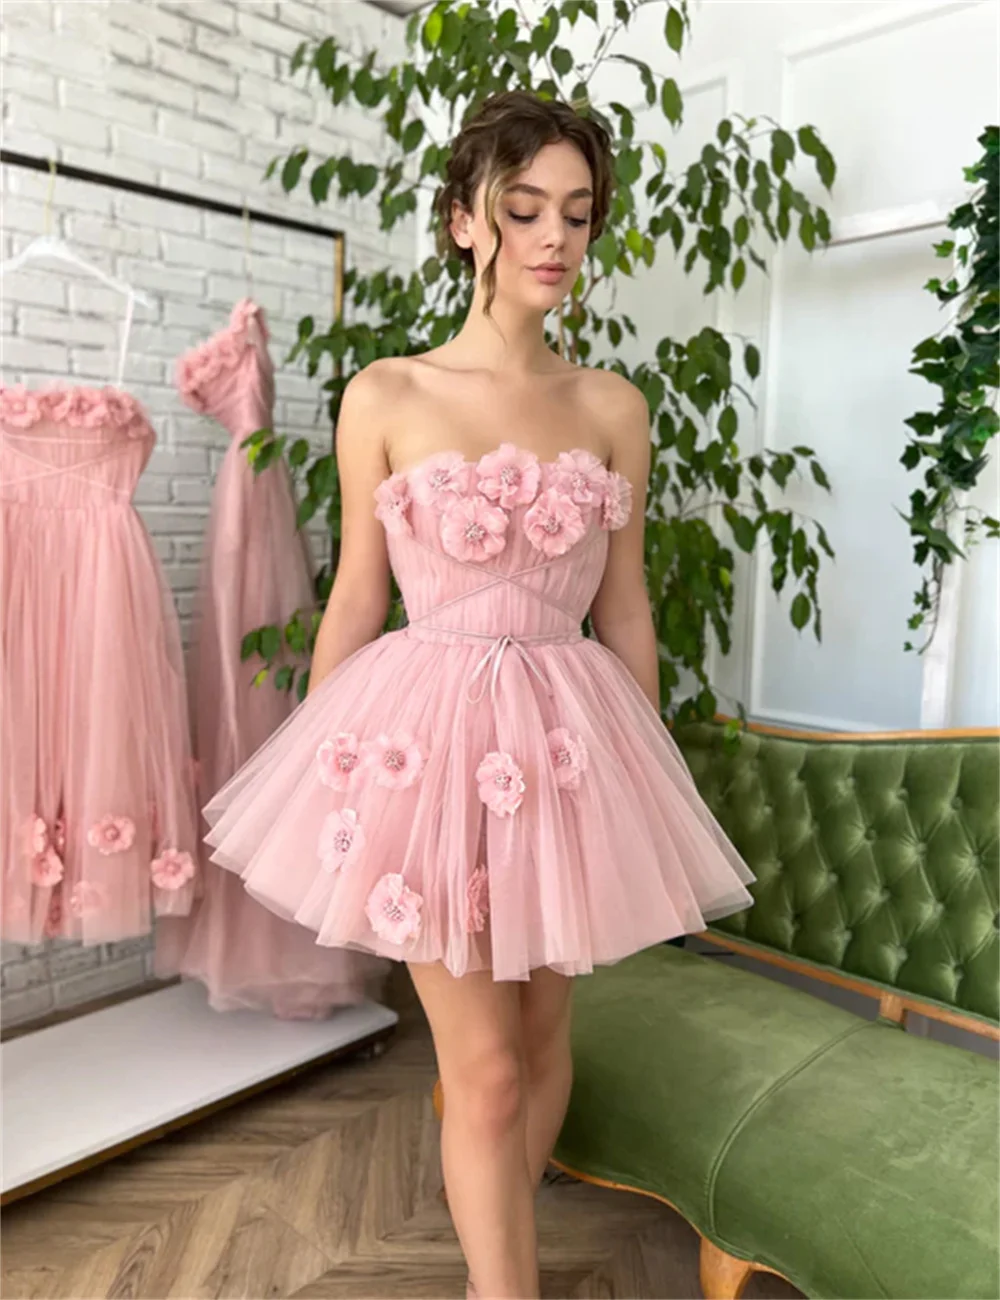 

Fancy A-Line Cocktail Dresses for Women Flowers Wedding Guest Mini Party Dresses Strapless Tulle with Floral Appliques 2024